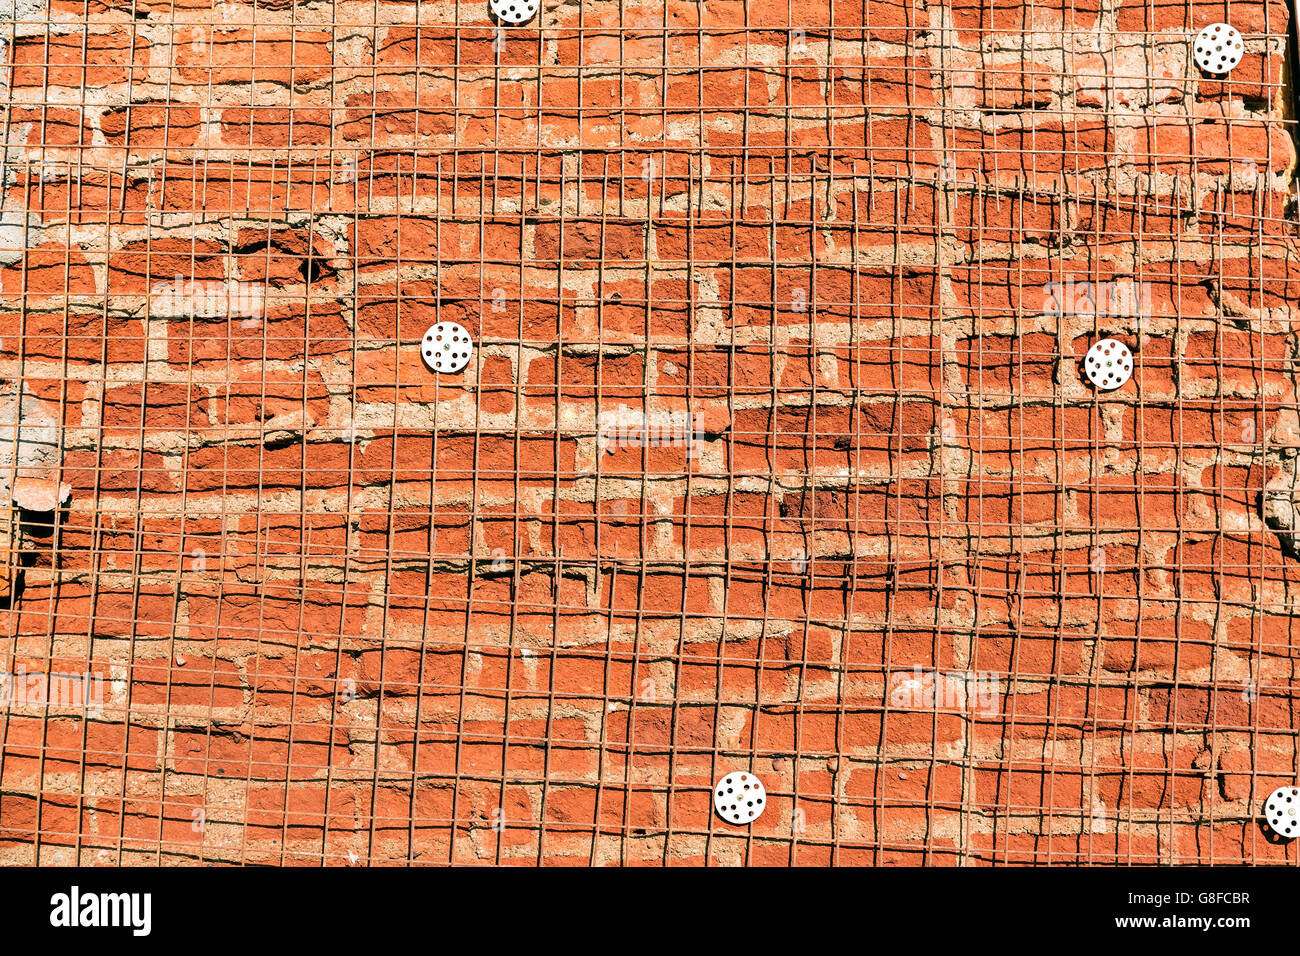 Texture of damaged brick wall with reinforcement steel mesh Stock Photo